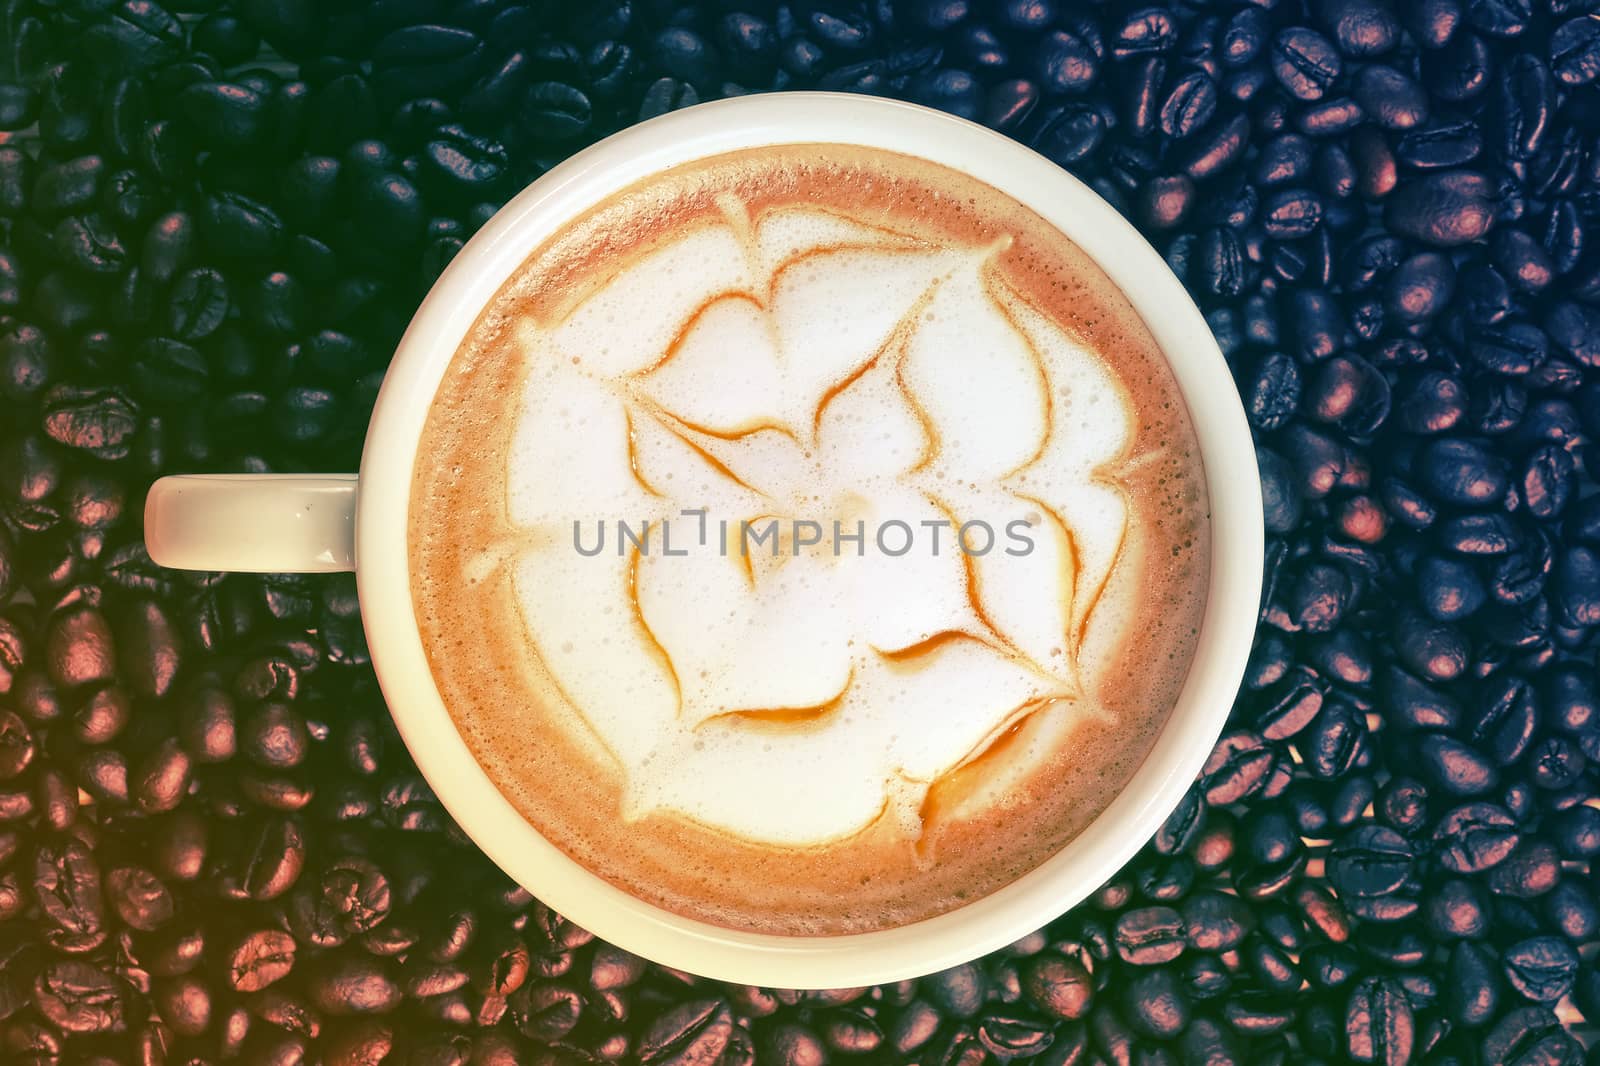 Capucino art coffee on Coffee beans background by Surasak